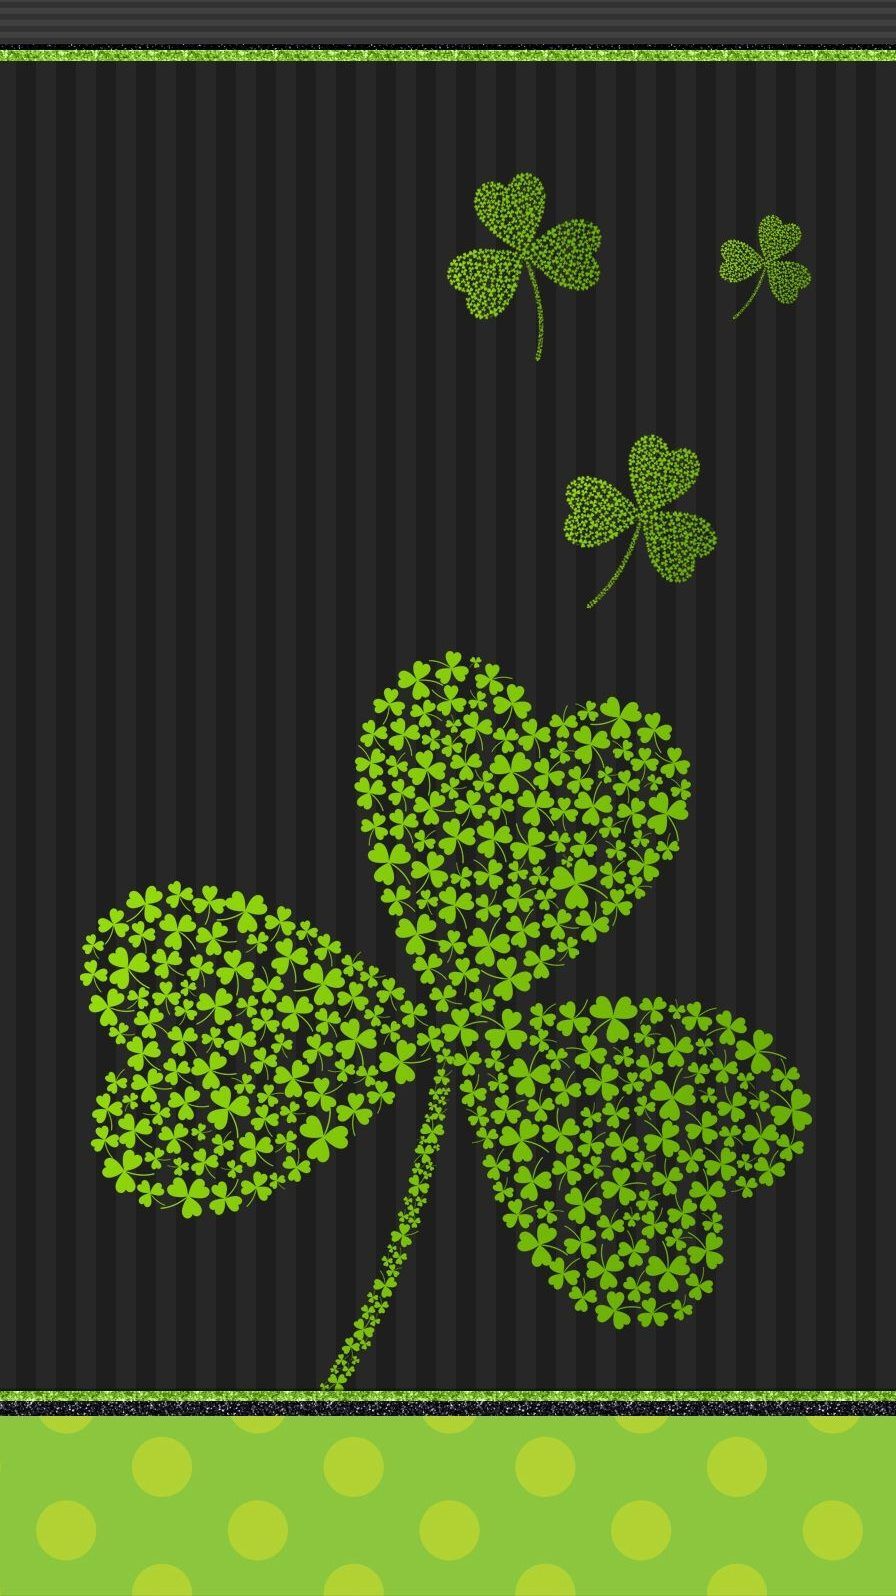 Best 10 iPhone Wallpaper for St. Patrick's Day 2020 It Before Me